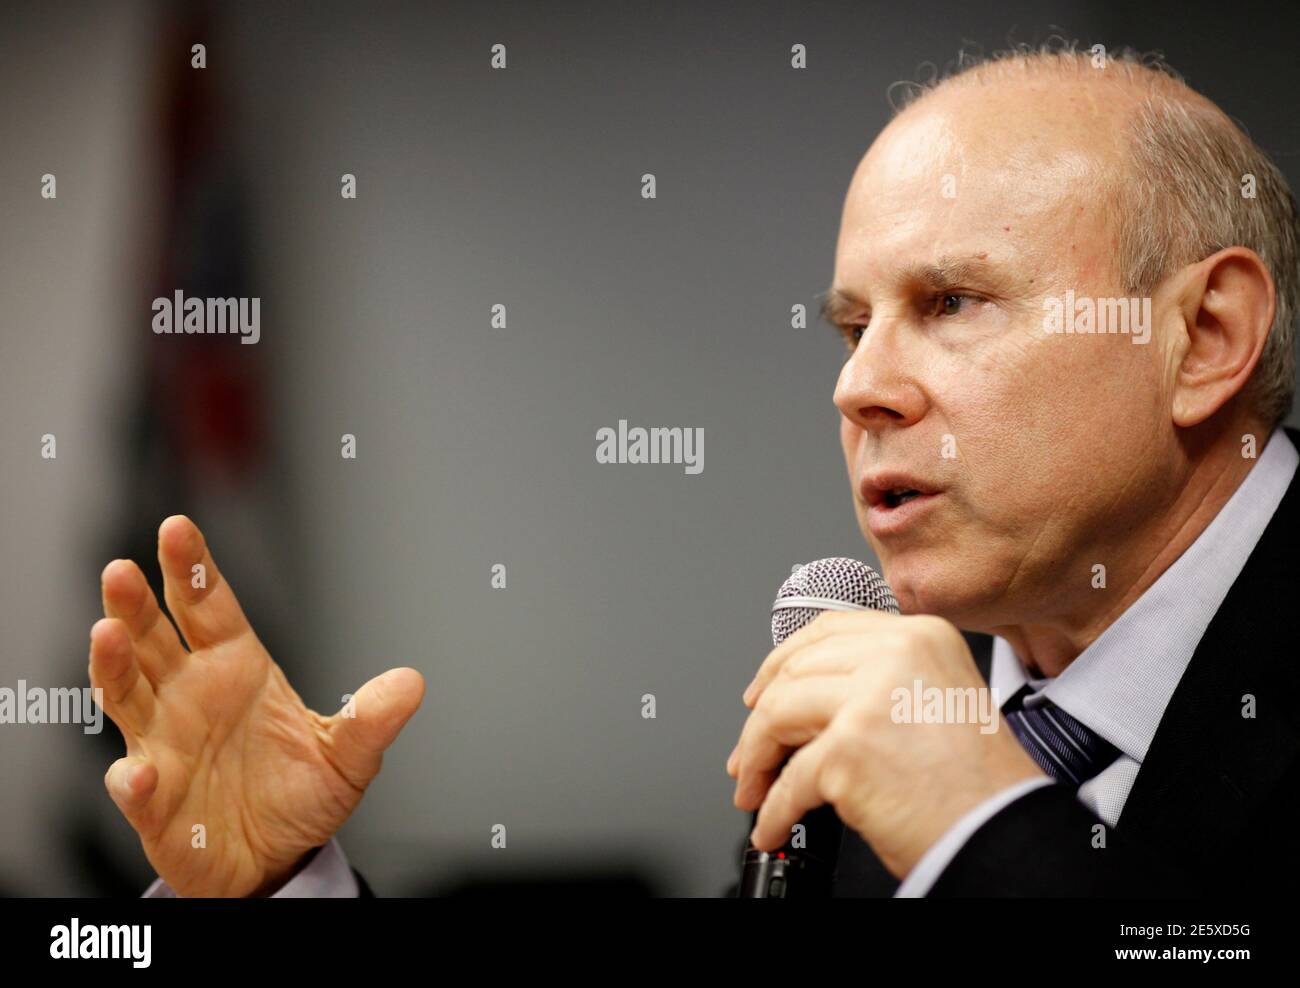 Brazil's Finance Economy Guido Mantega gestures as he attends a news conference in Sao Paulo September 2, 2011. Mantega told the news conference he expected growth in the third quarter to be similar to the April-June period before accelerating in the final quarter. REUTERS/Paulo Whitaker (BRAZIL - Tags: POLITICS BUSINESS) Stock Photo